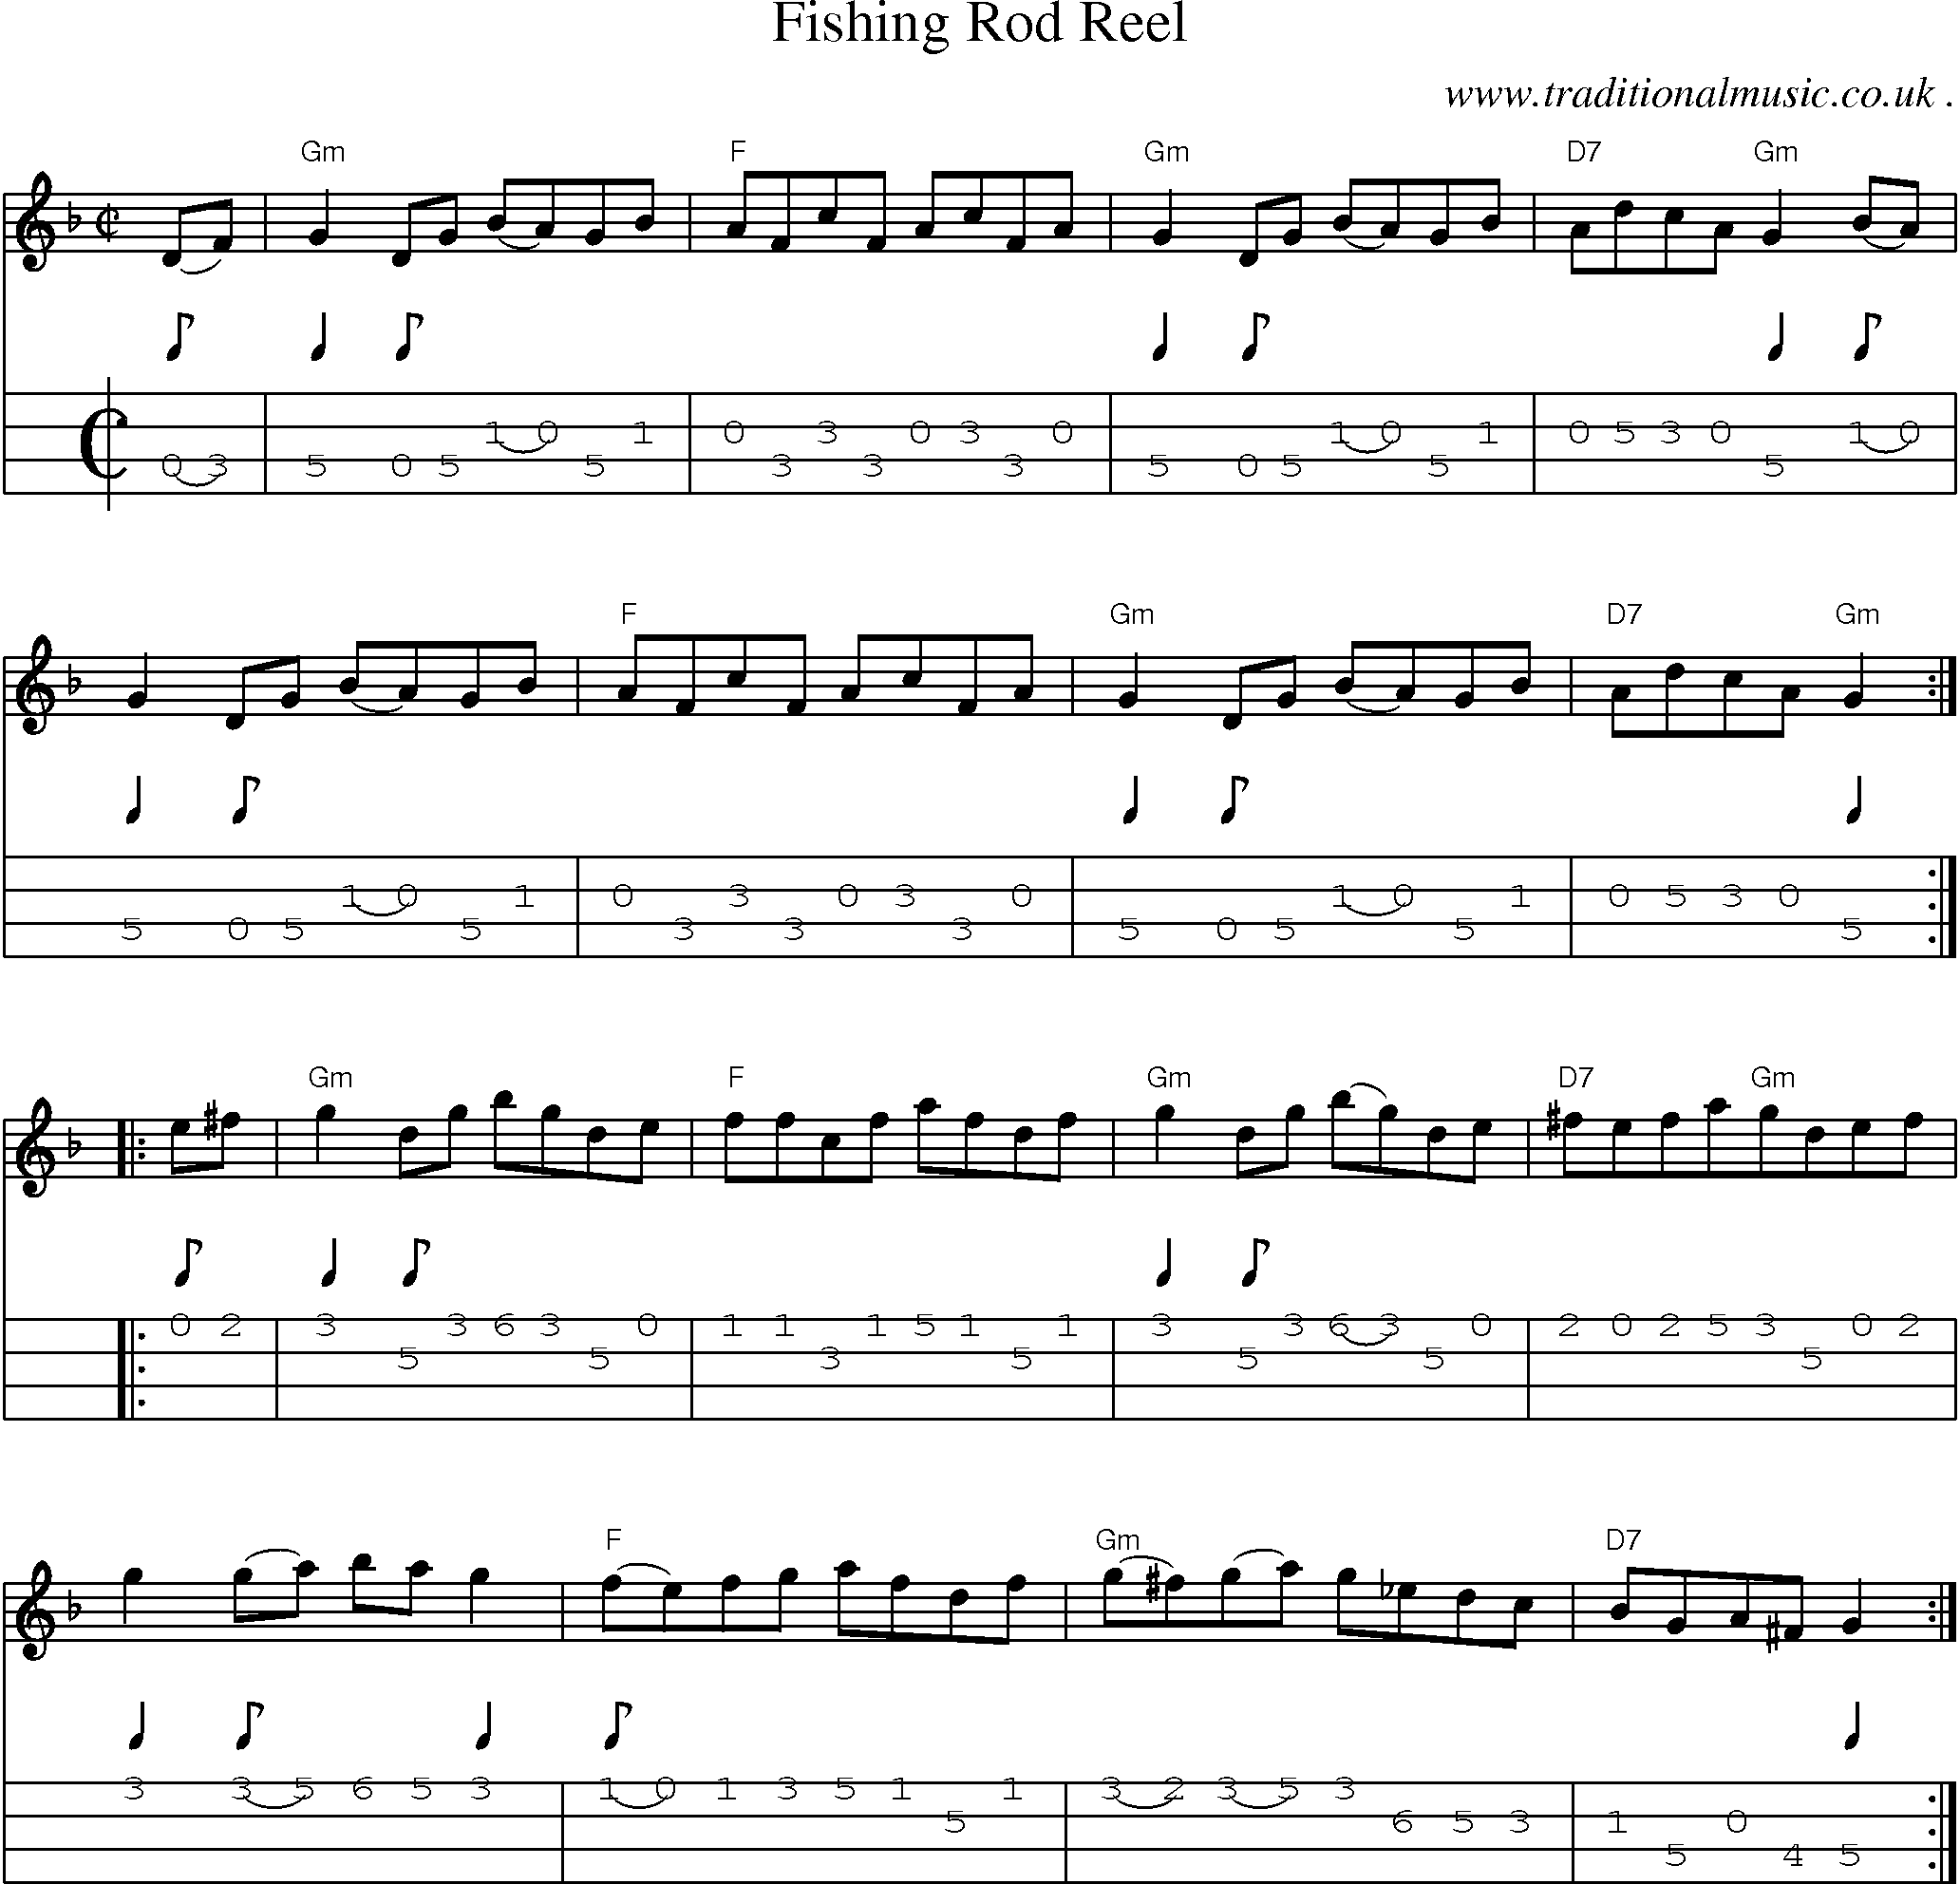 Sheet-Music and Mandolin Tabs for Fishing Rod Reel